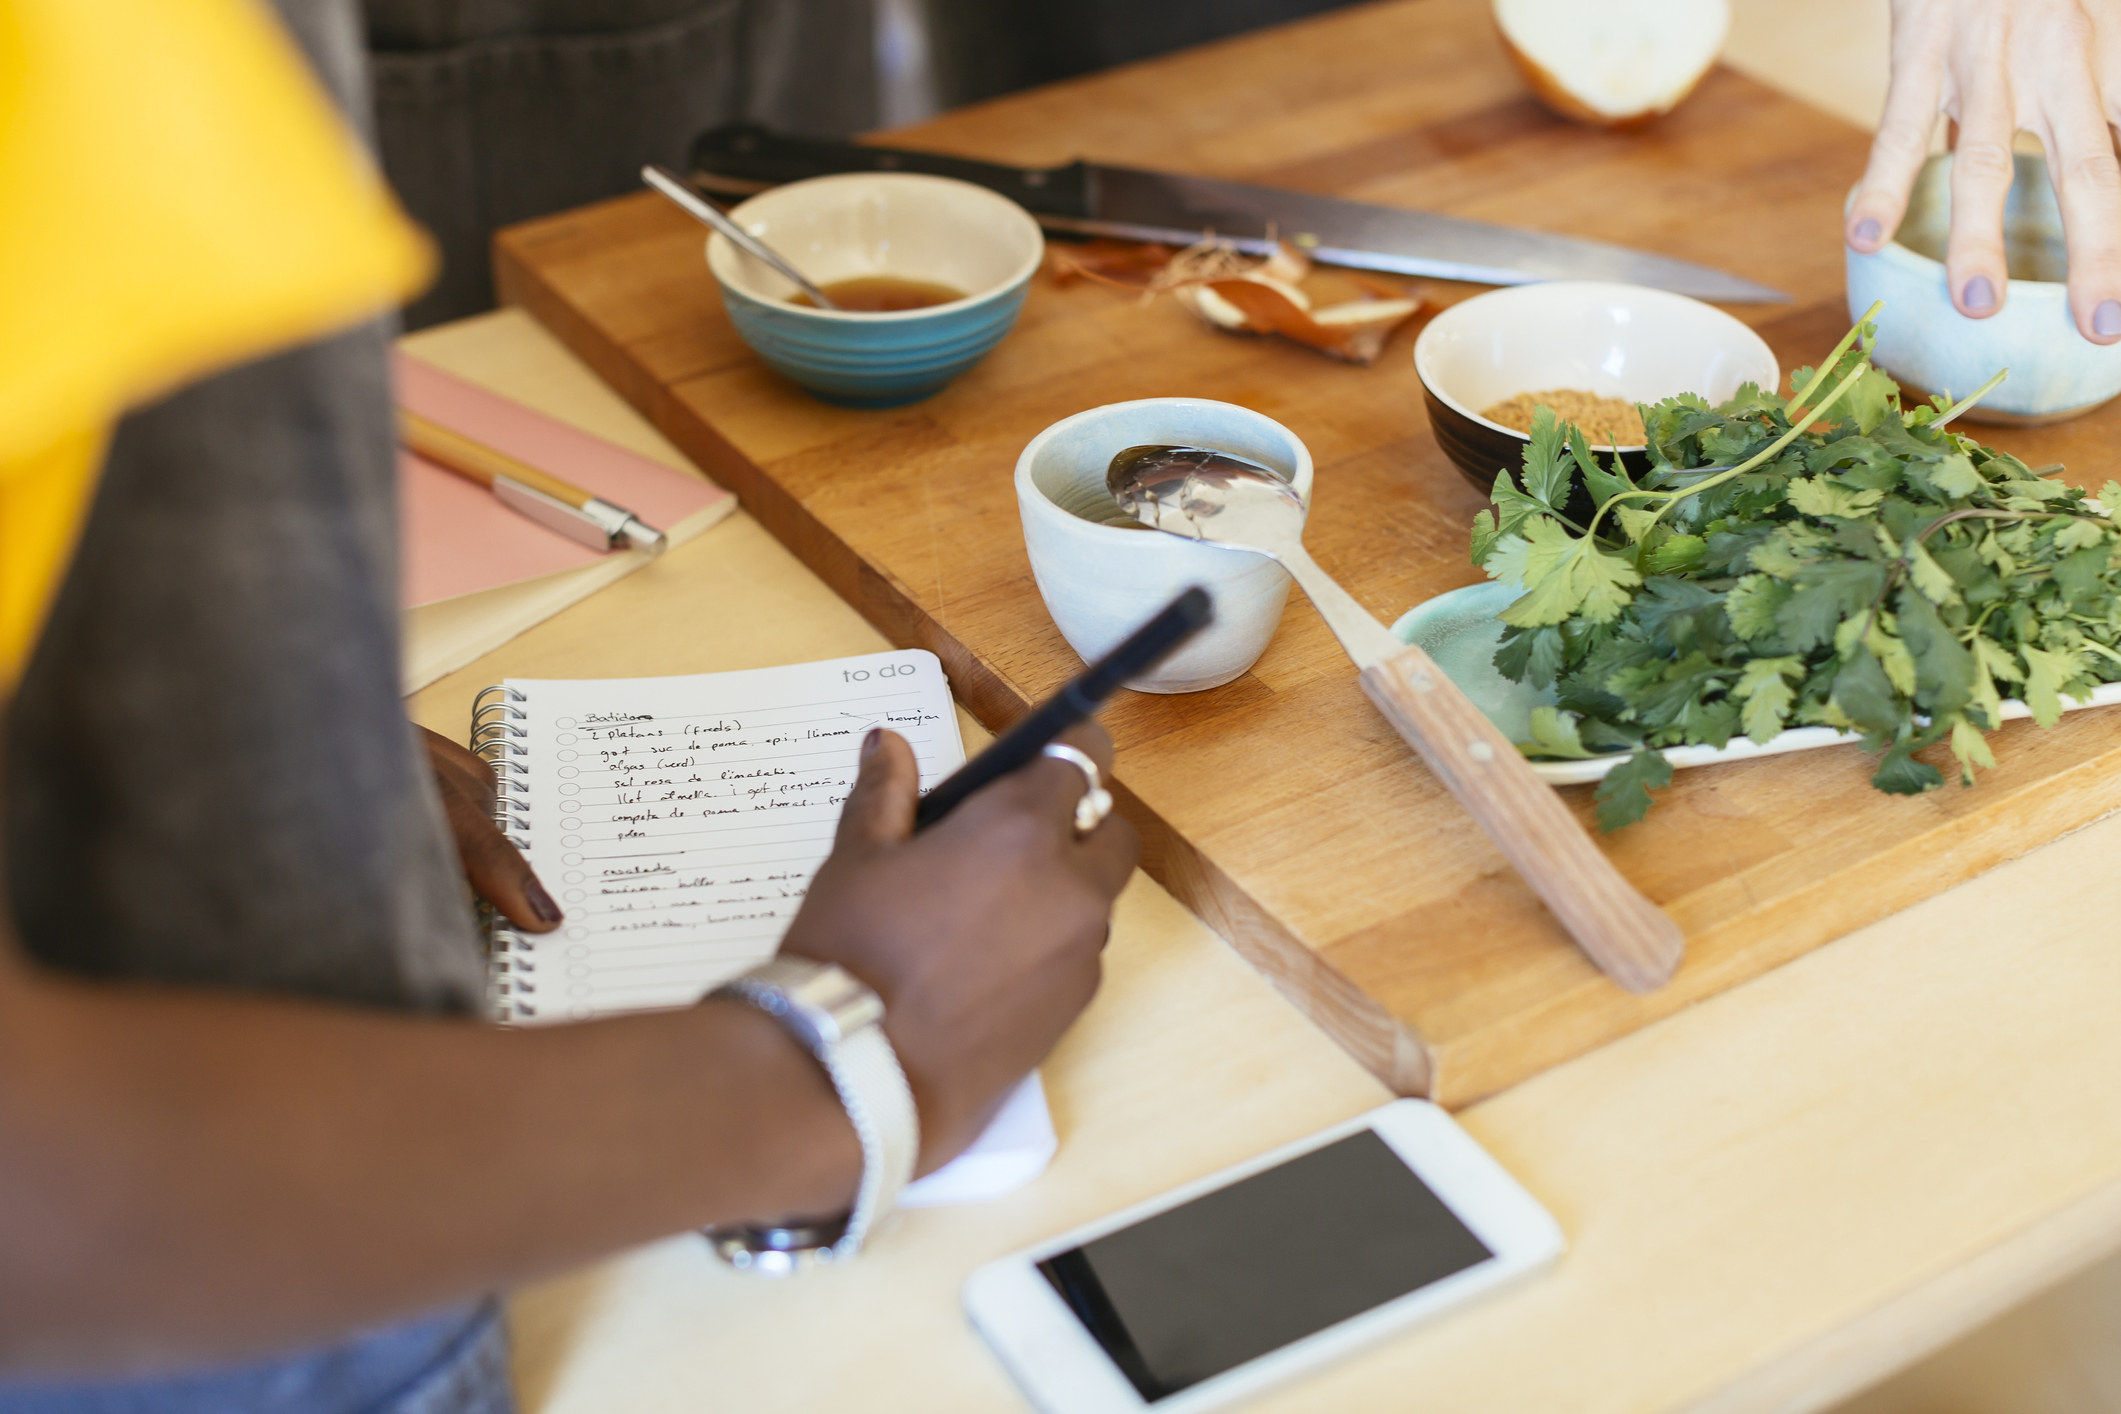 Close-up of woman taking notes while cooking.